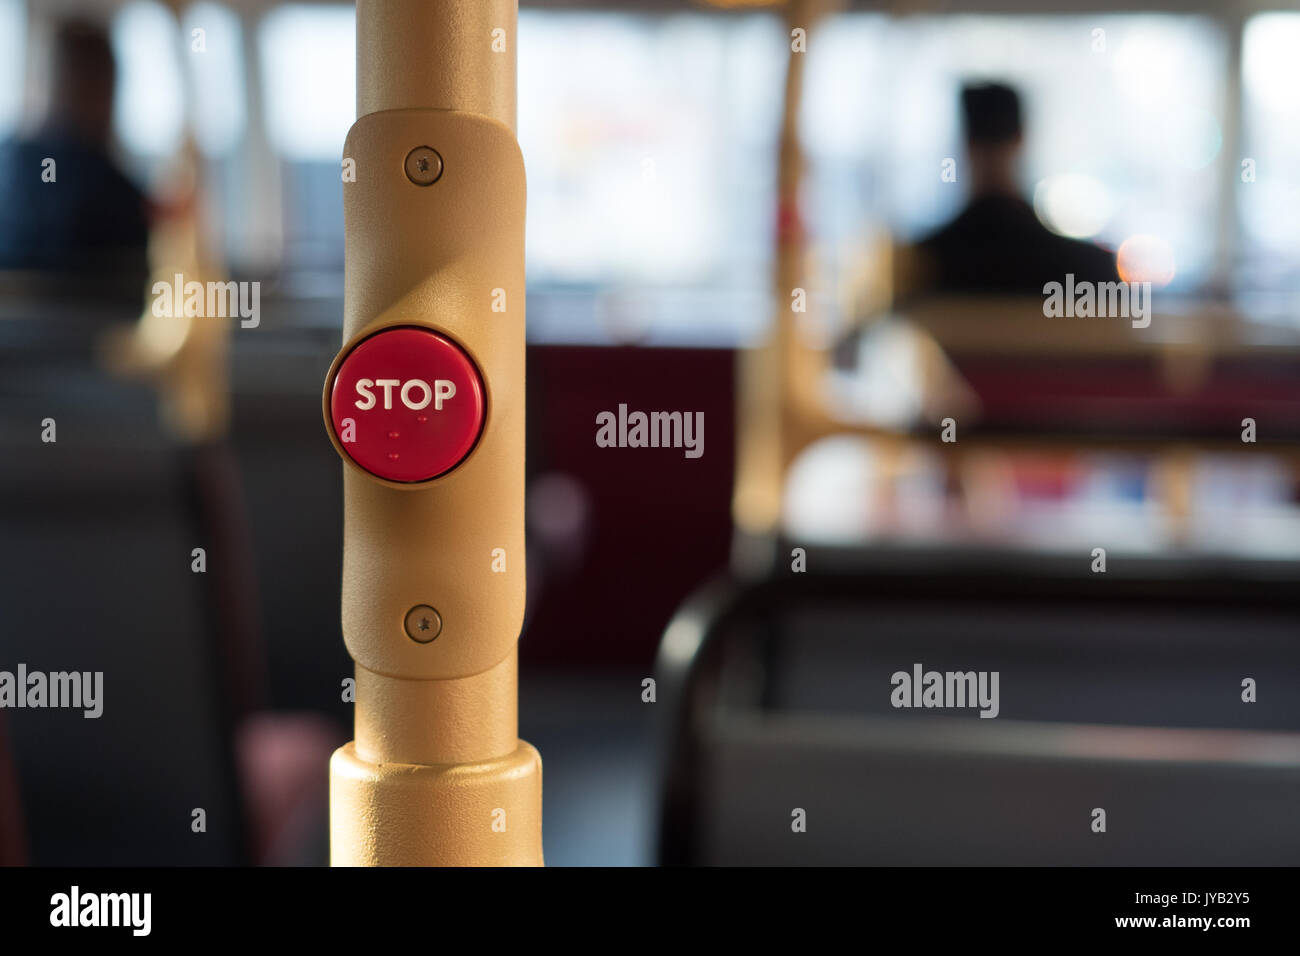 Stop button on a London bus with a blurred background. London, 2017 Stock Photo